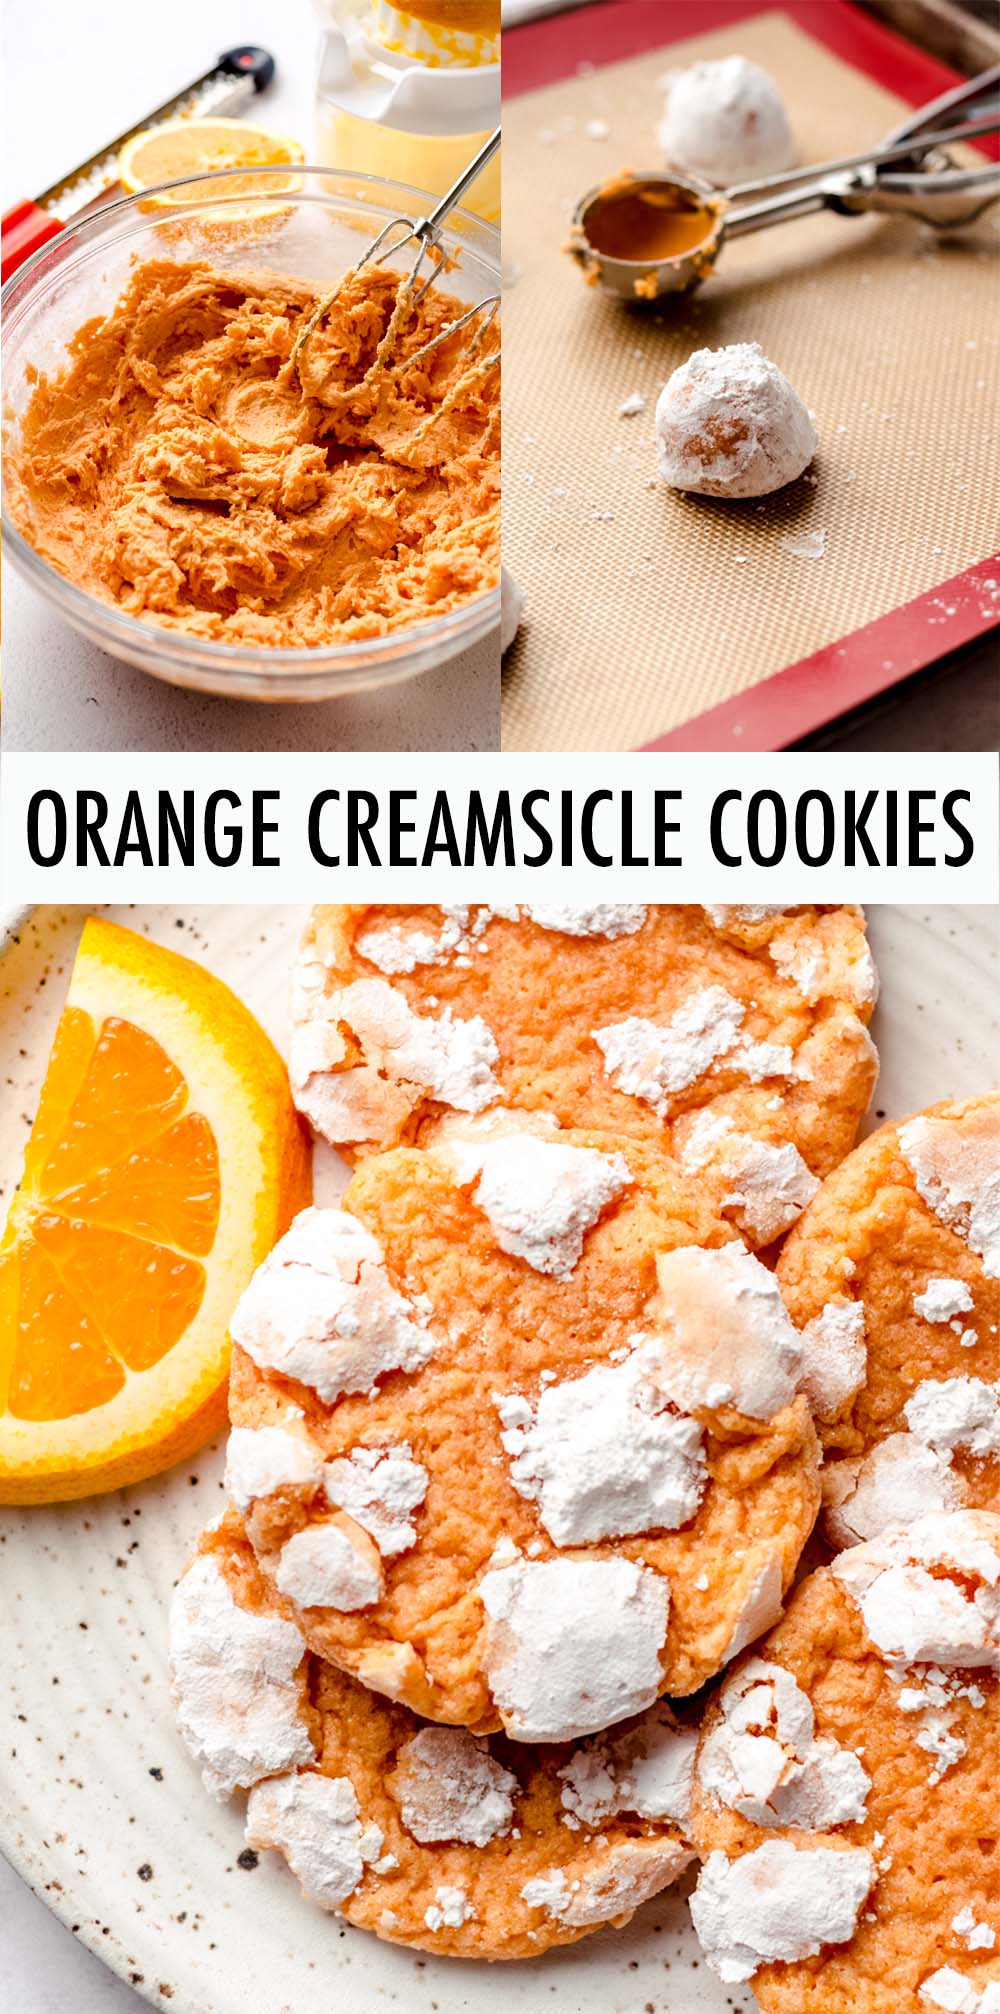 Just like the orange creamsicles you loved as a kid, these orange creamsicle cookies are bursting with sweet and creamy vanilla orange flavor and rolled in powdered sugar just before baking for that extra melt-in-your-mouth experience. via @frshaprilflours